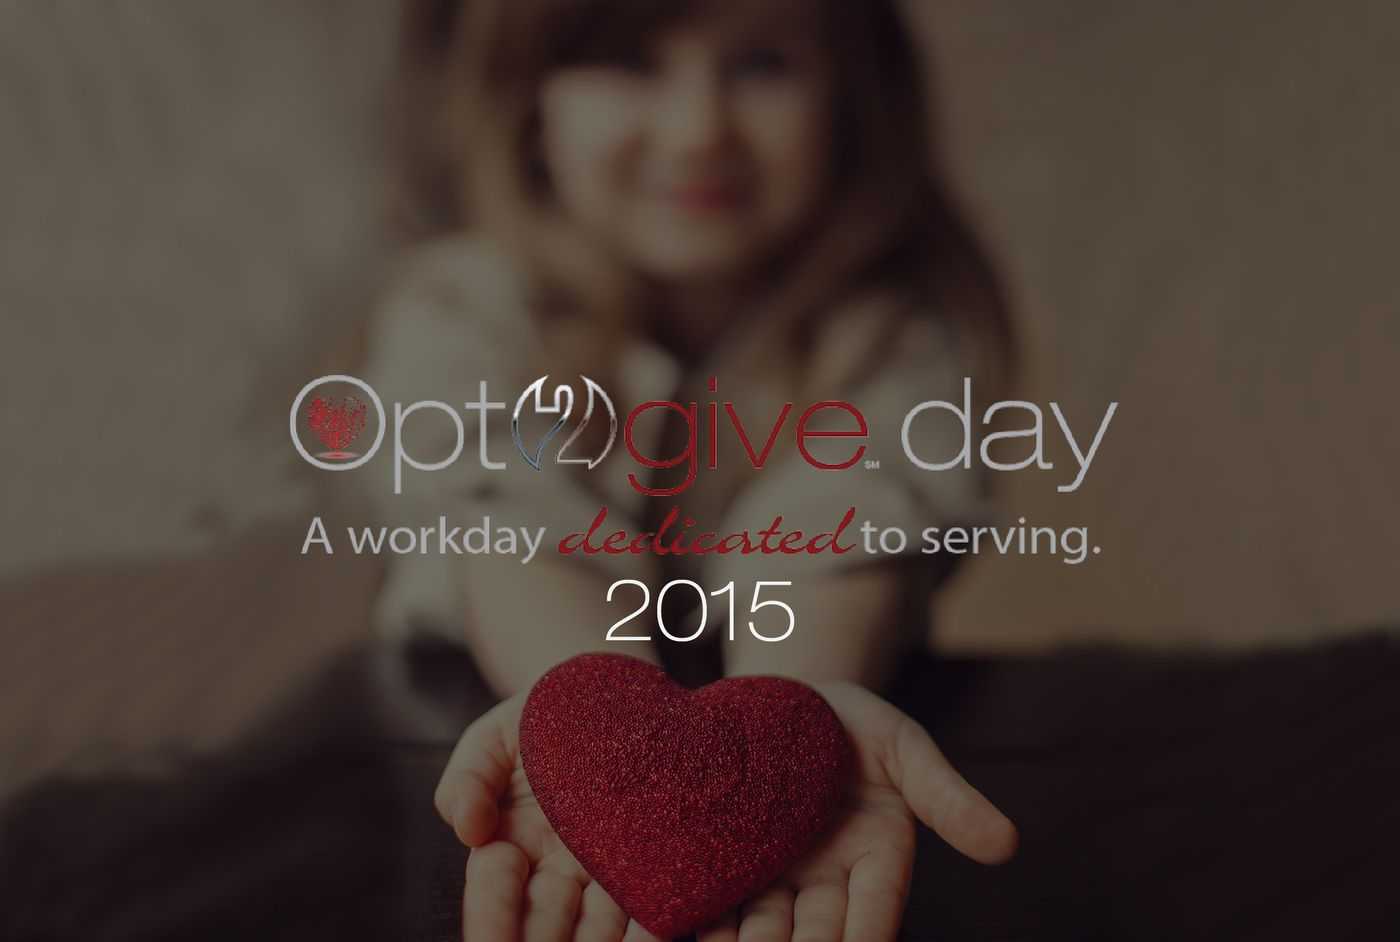 Our Chicago Team Throws a Party for Under-resourced Kids for Opt2give day 2015